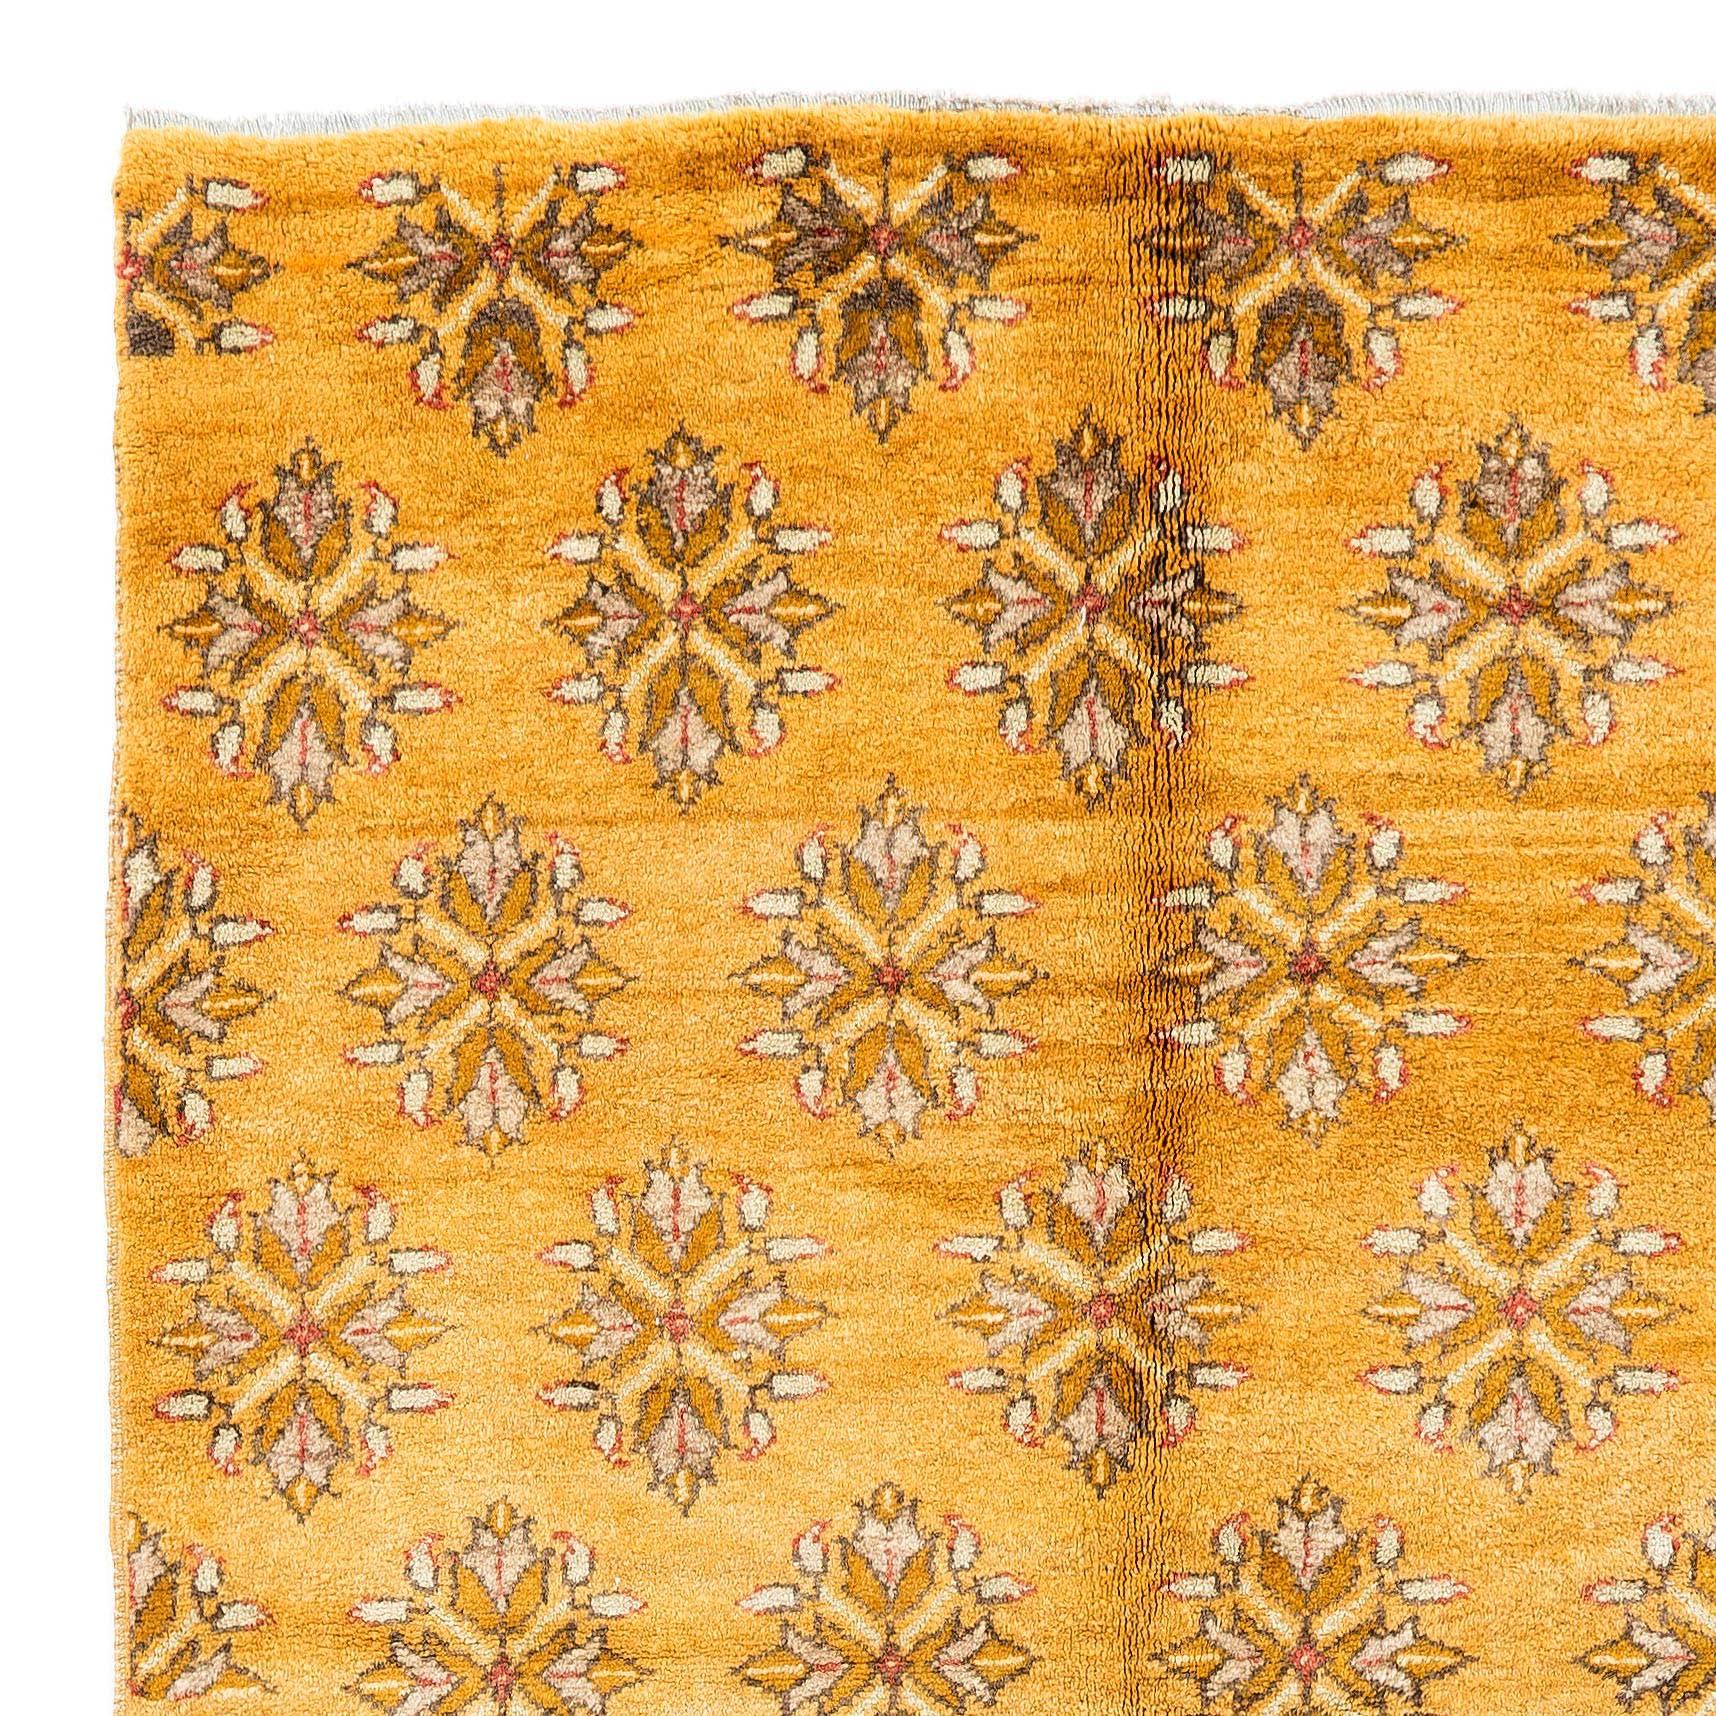 Mid-century Karapinar rug from Central Turkey in rare butterscotch yellow color. Measures: 4.9 x 9.8 ft
Finely hand-knotted with medium wool pile on wool foundation. 
Excellent original condition. All natural dyes.